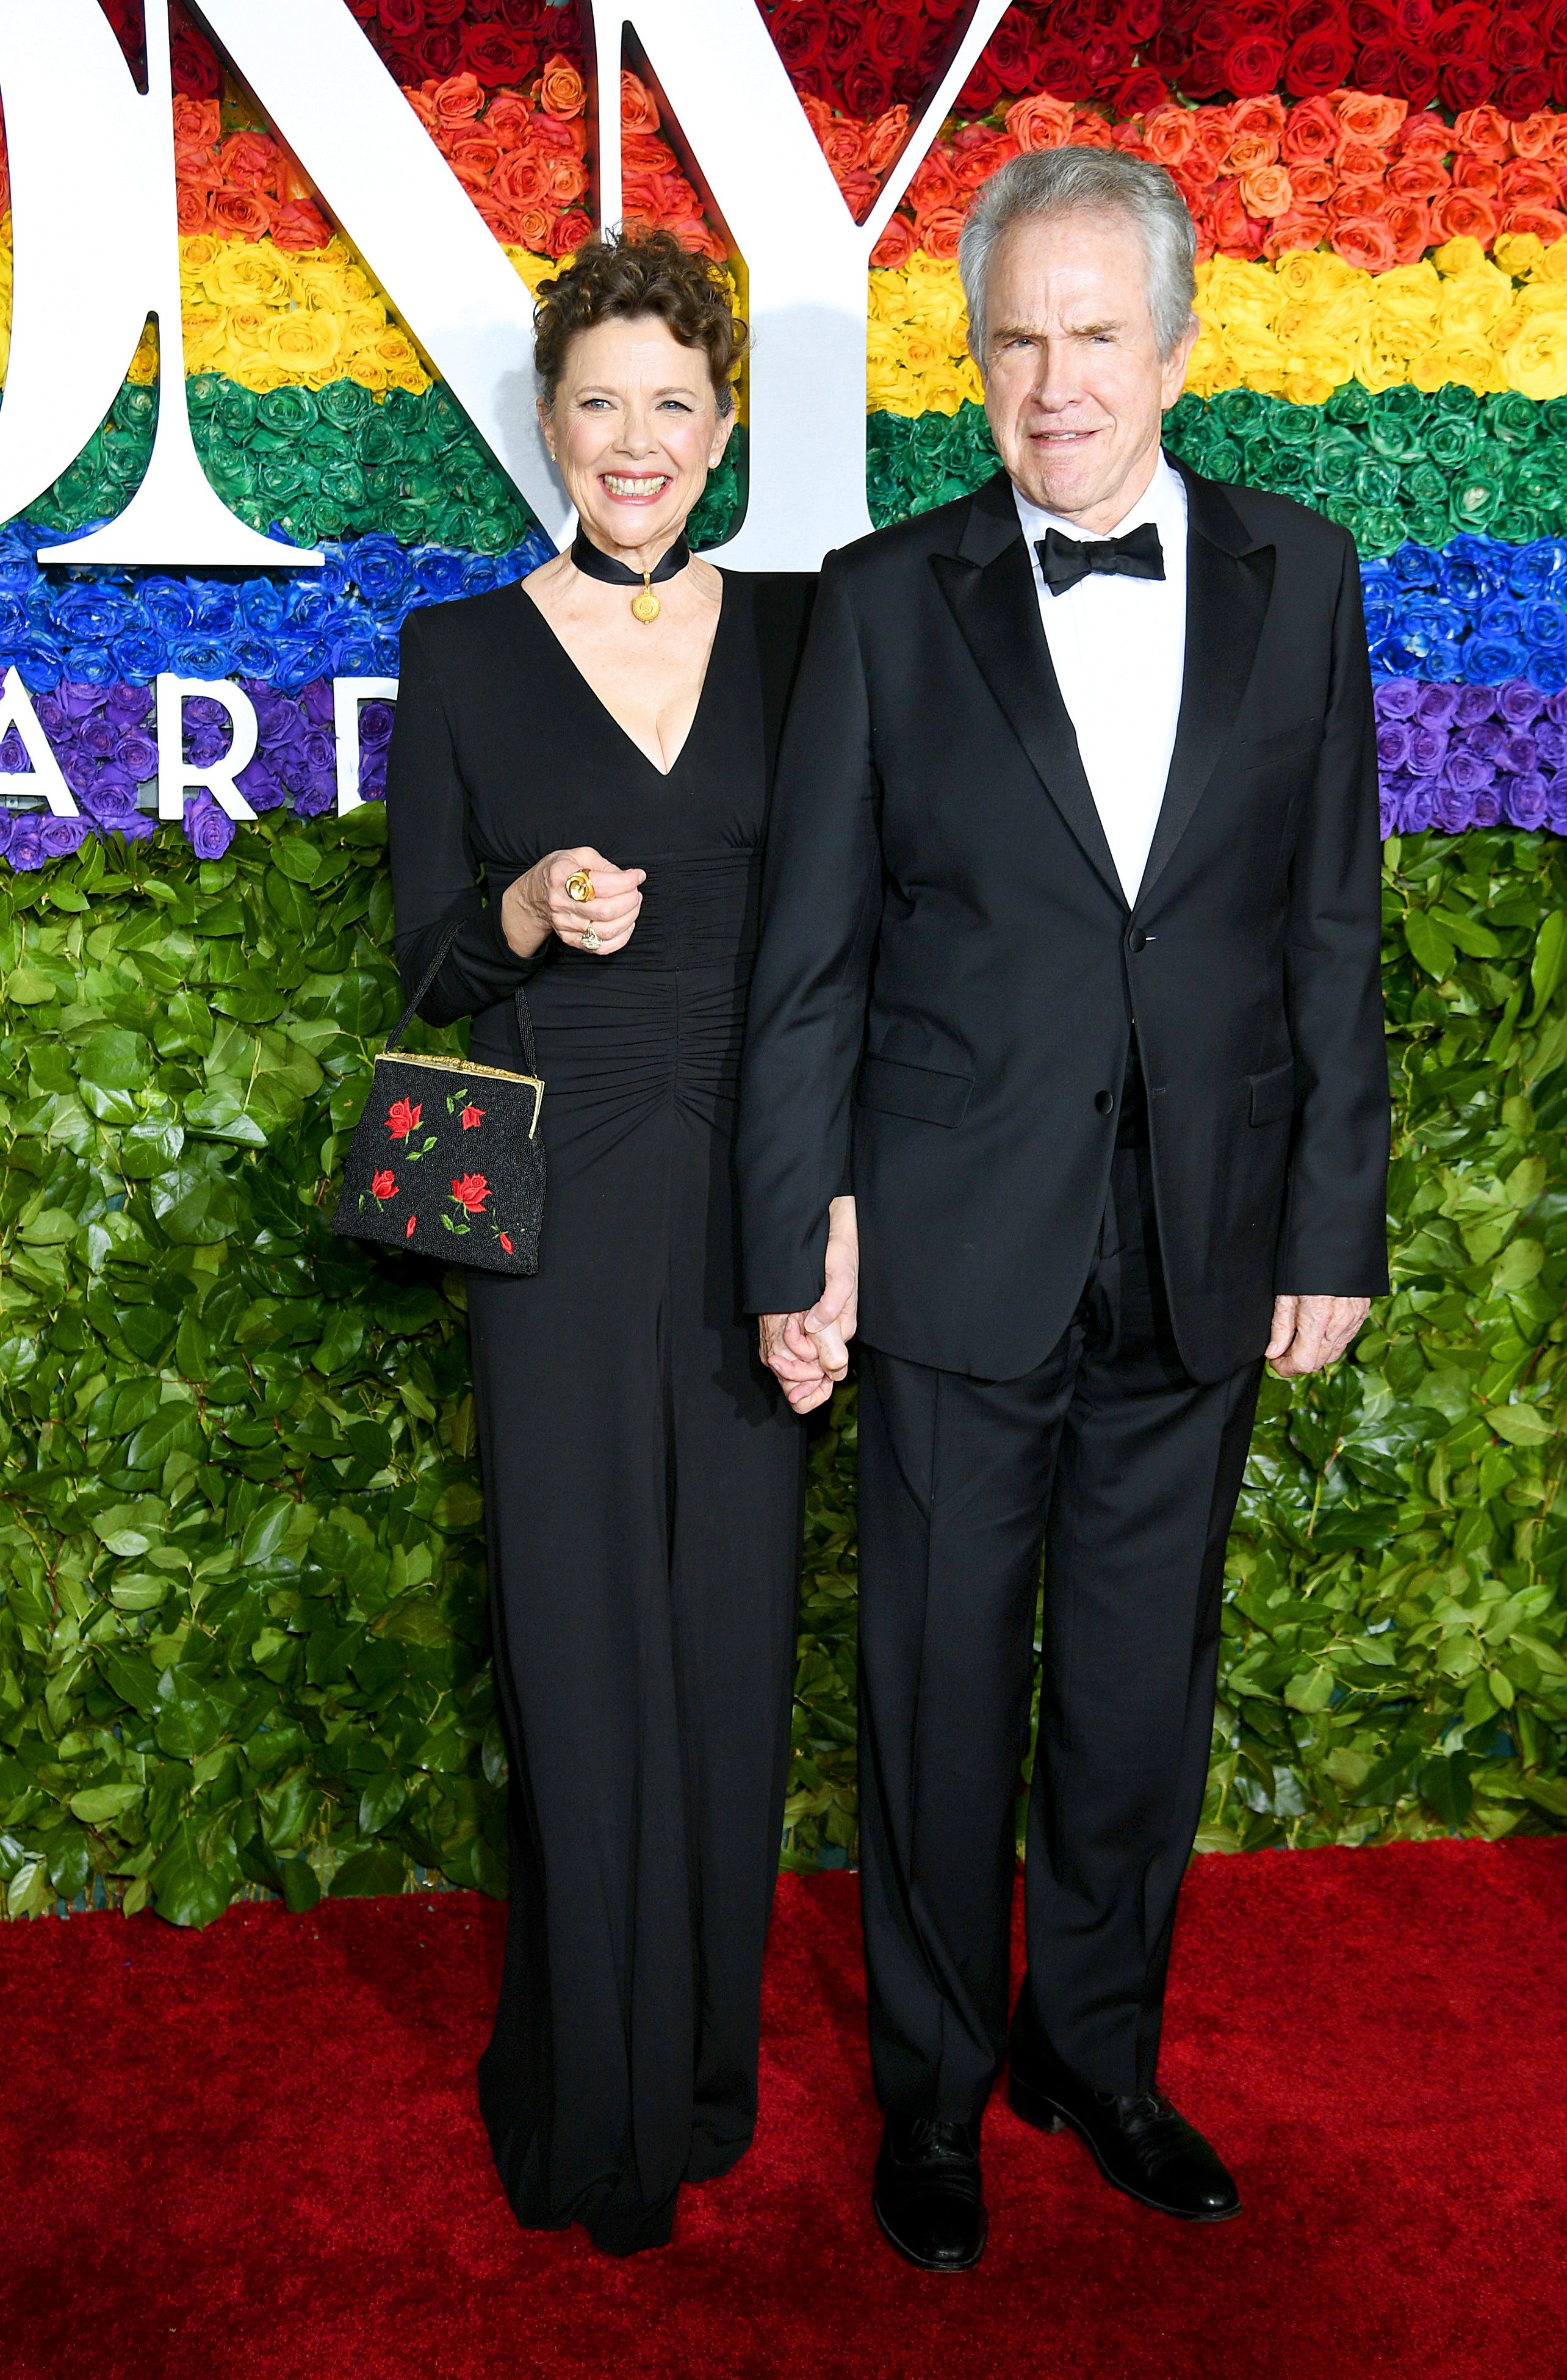 Annette Bening and Warren Beatty at the 73rd Annual Tony Awards at Radio City Music Hall on June 9, 2019, in New York City | Photo: Dimitrios Kambouris/Getty Images